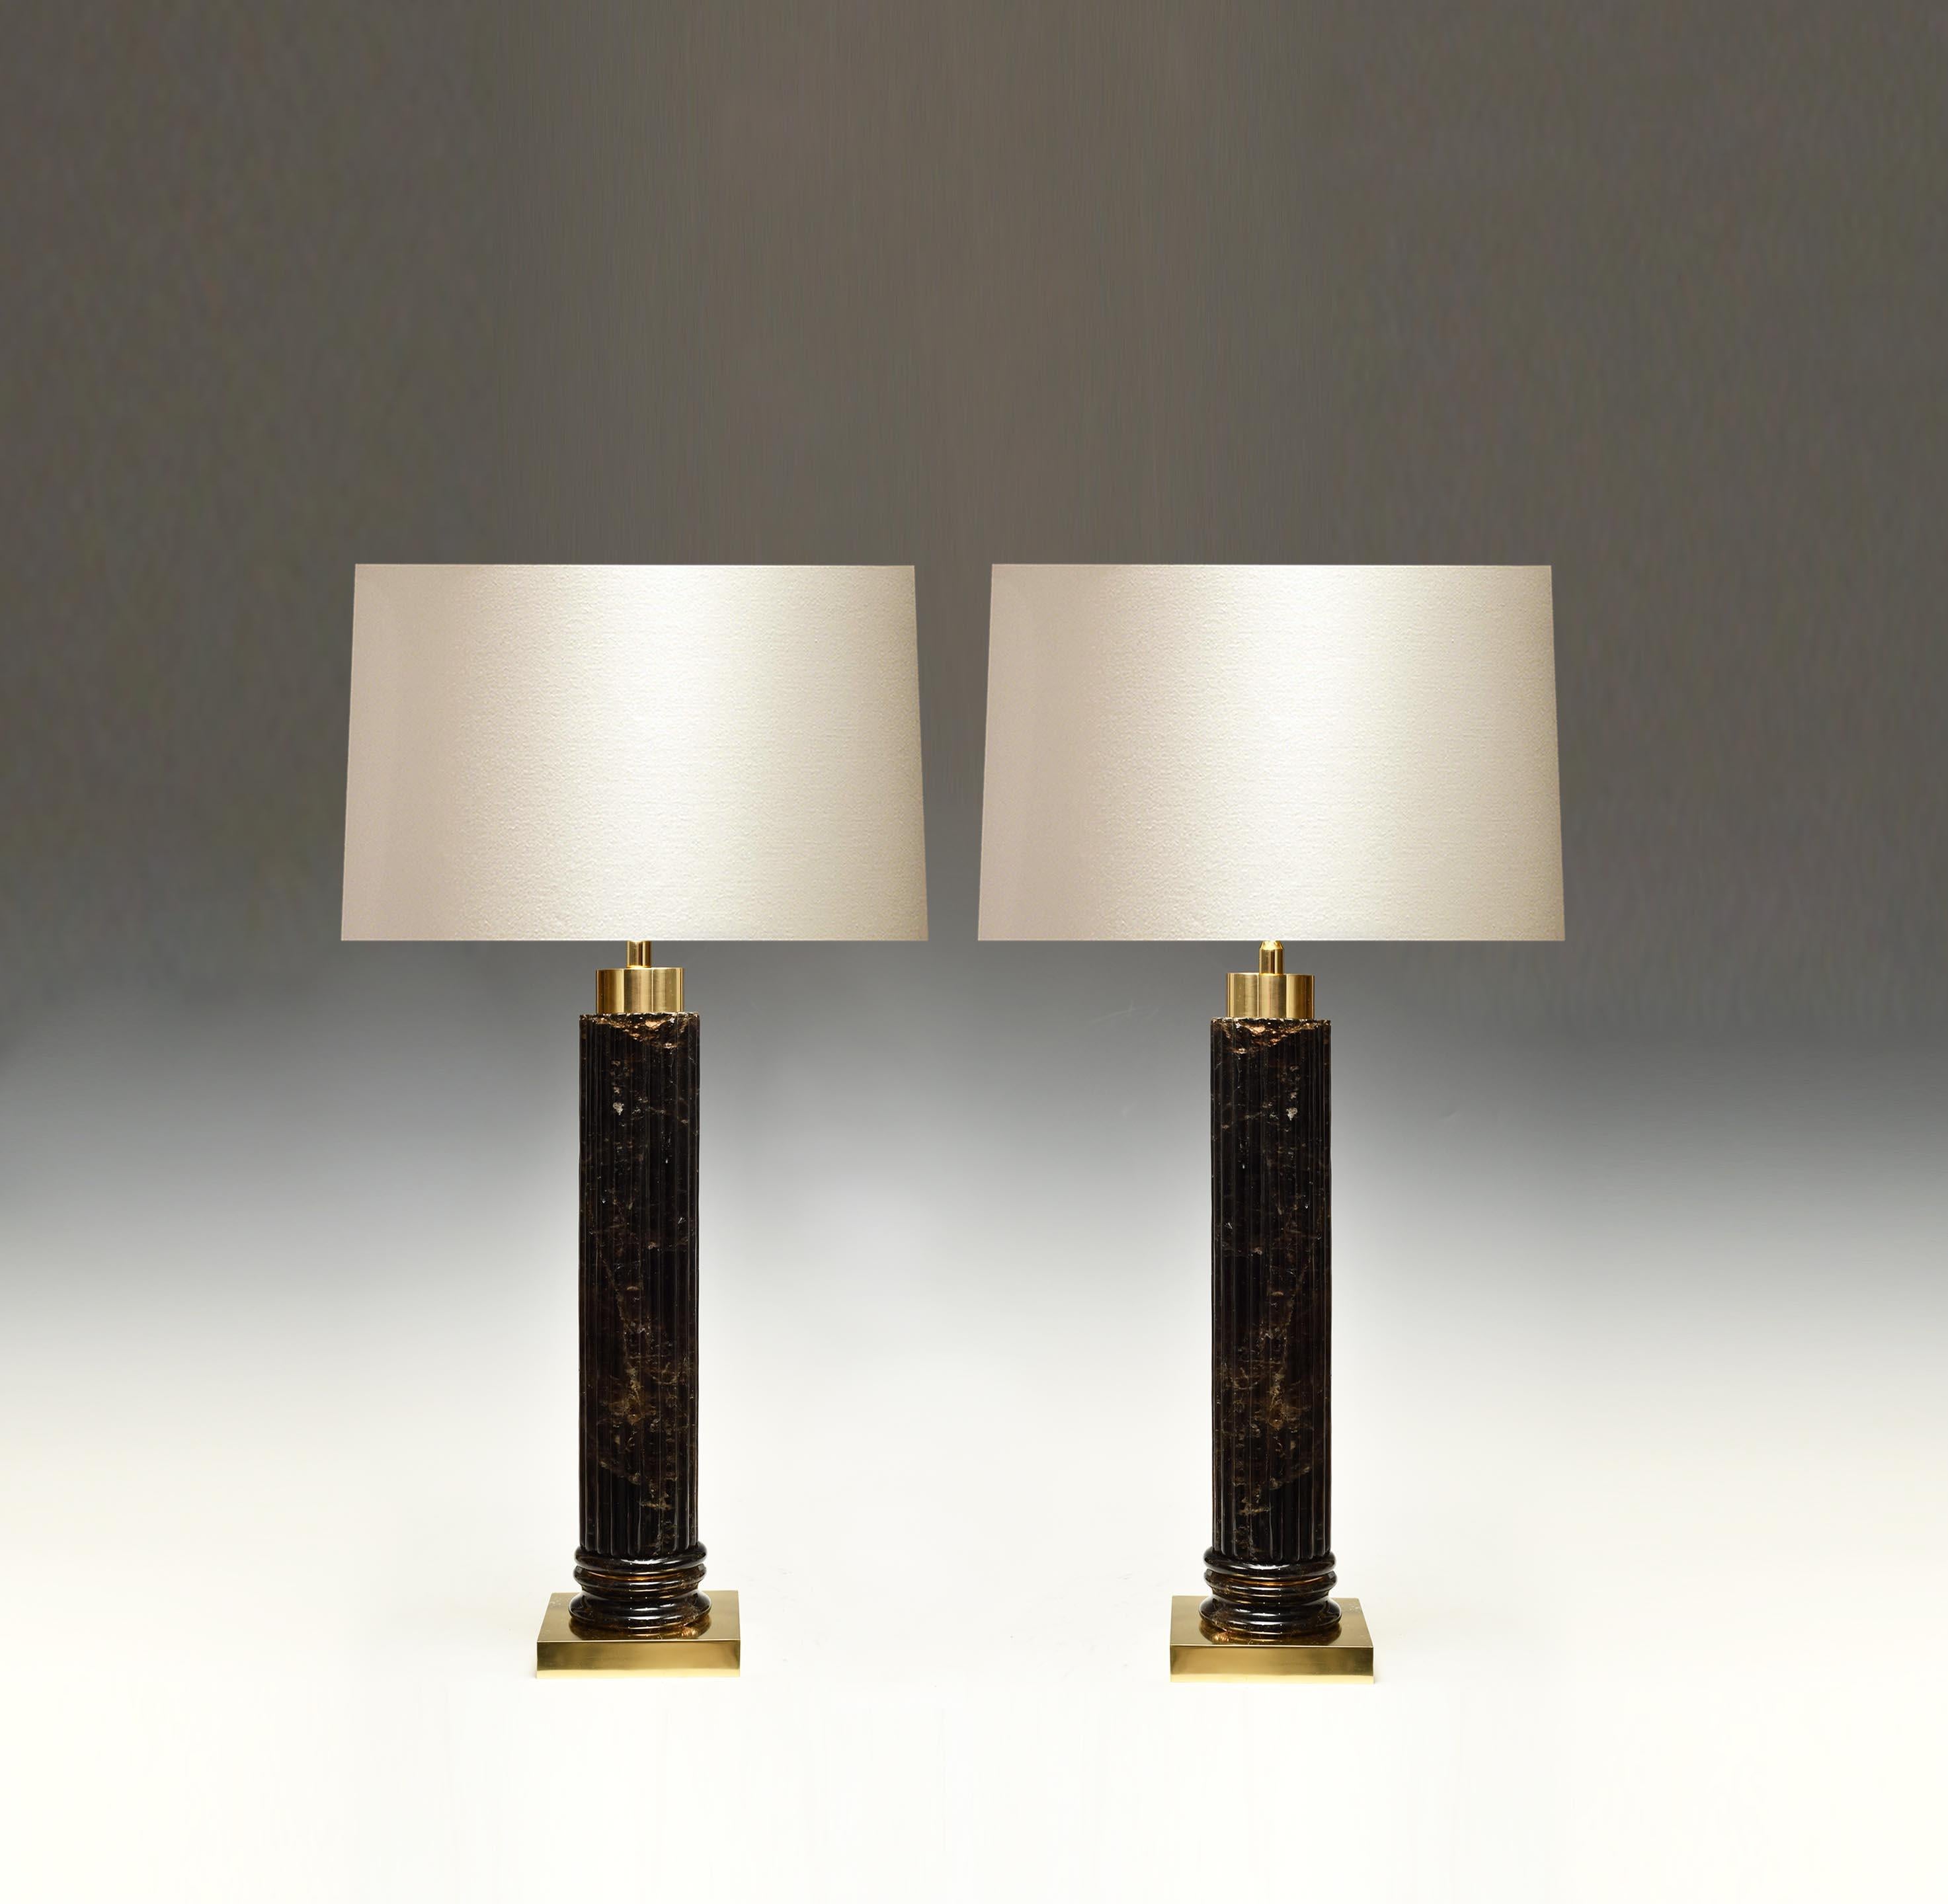 A pair of carved strips cylindrical smoky rock crystal lamps with polished brass bases. Created by Phoenix Gallery.
Each lamp installs two sockets.
To the top of rock crystal: 17